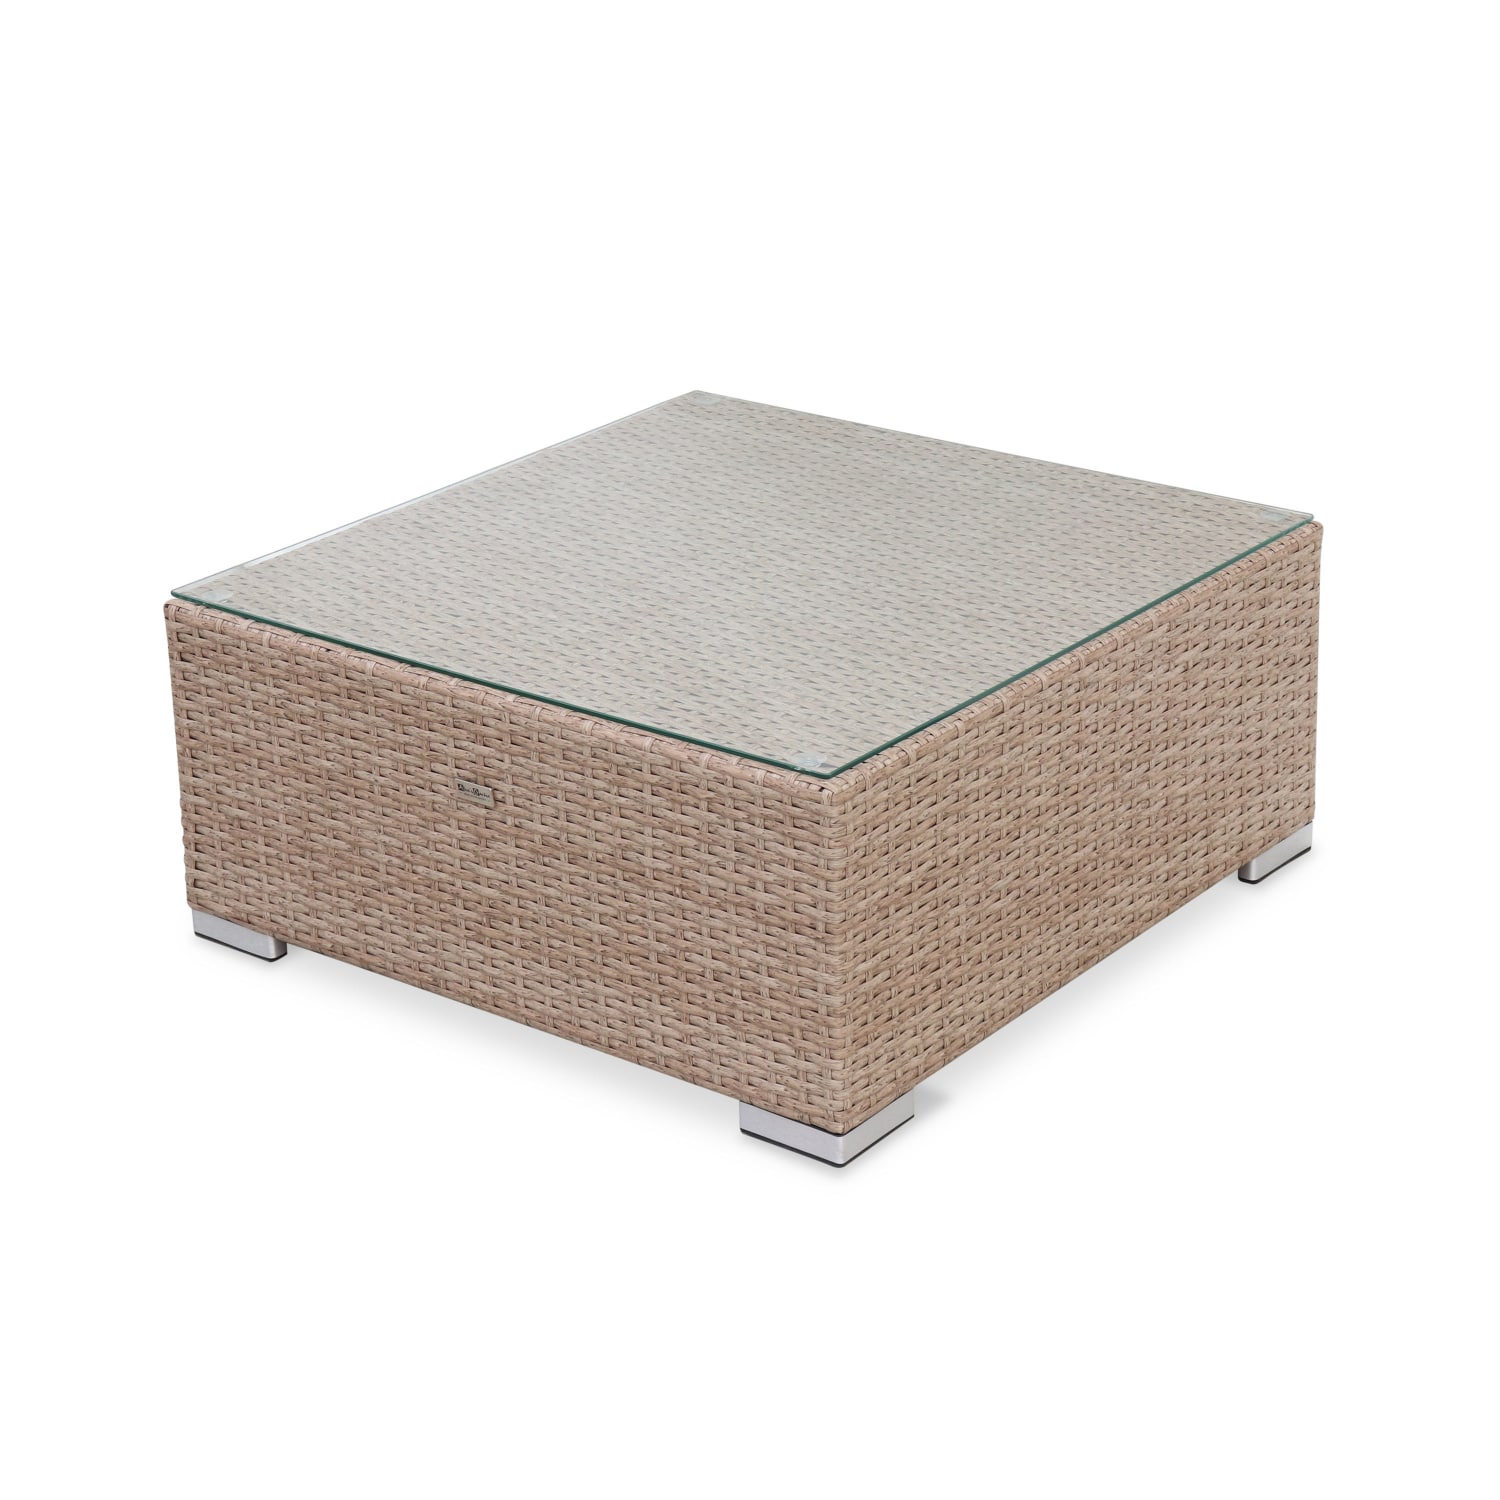 NAPOLI 5 Seater outdoor lounge Natural/Beige